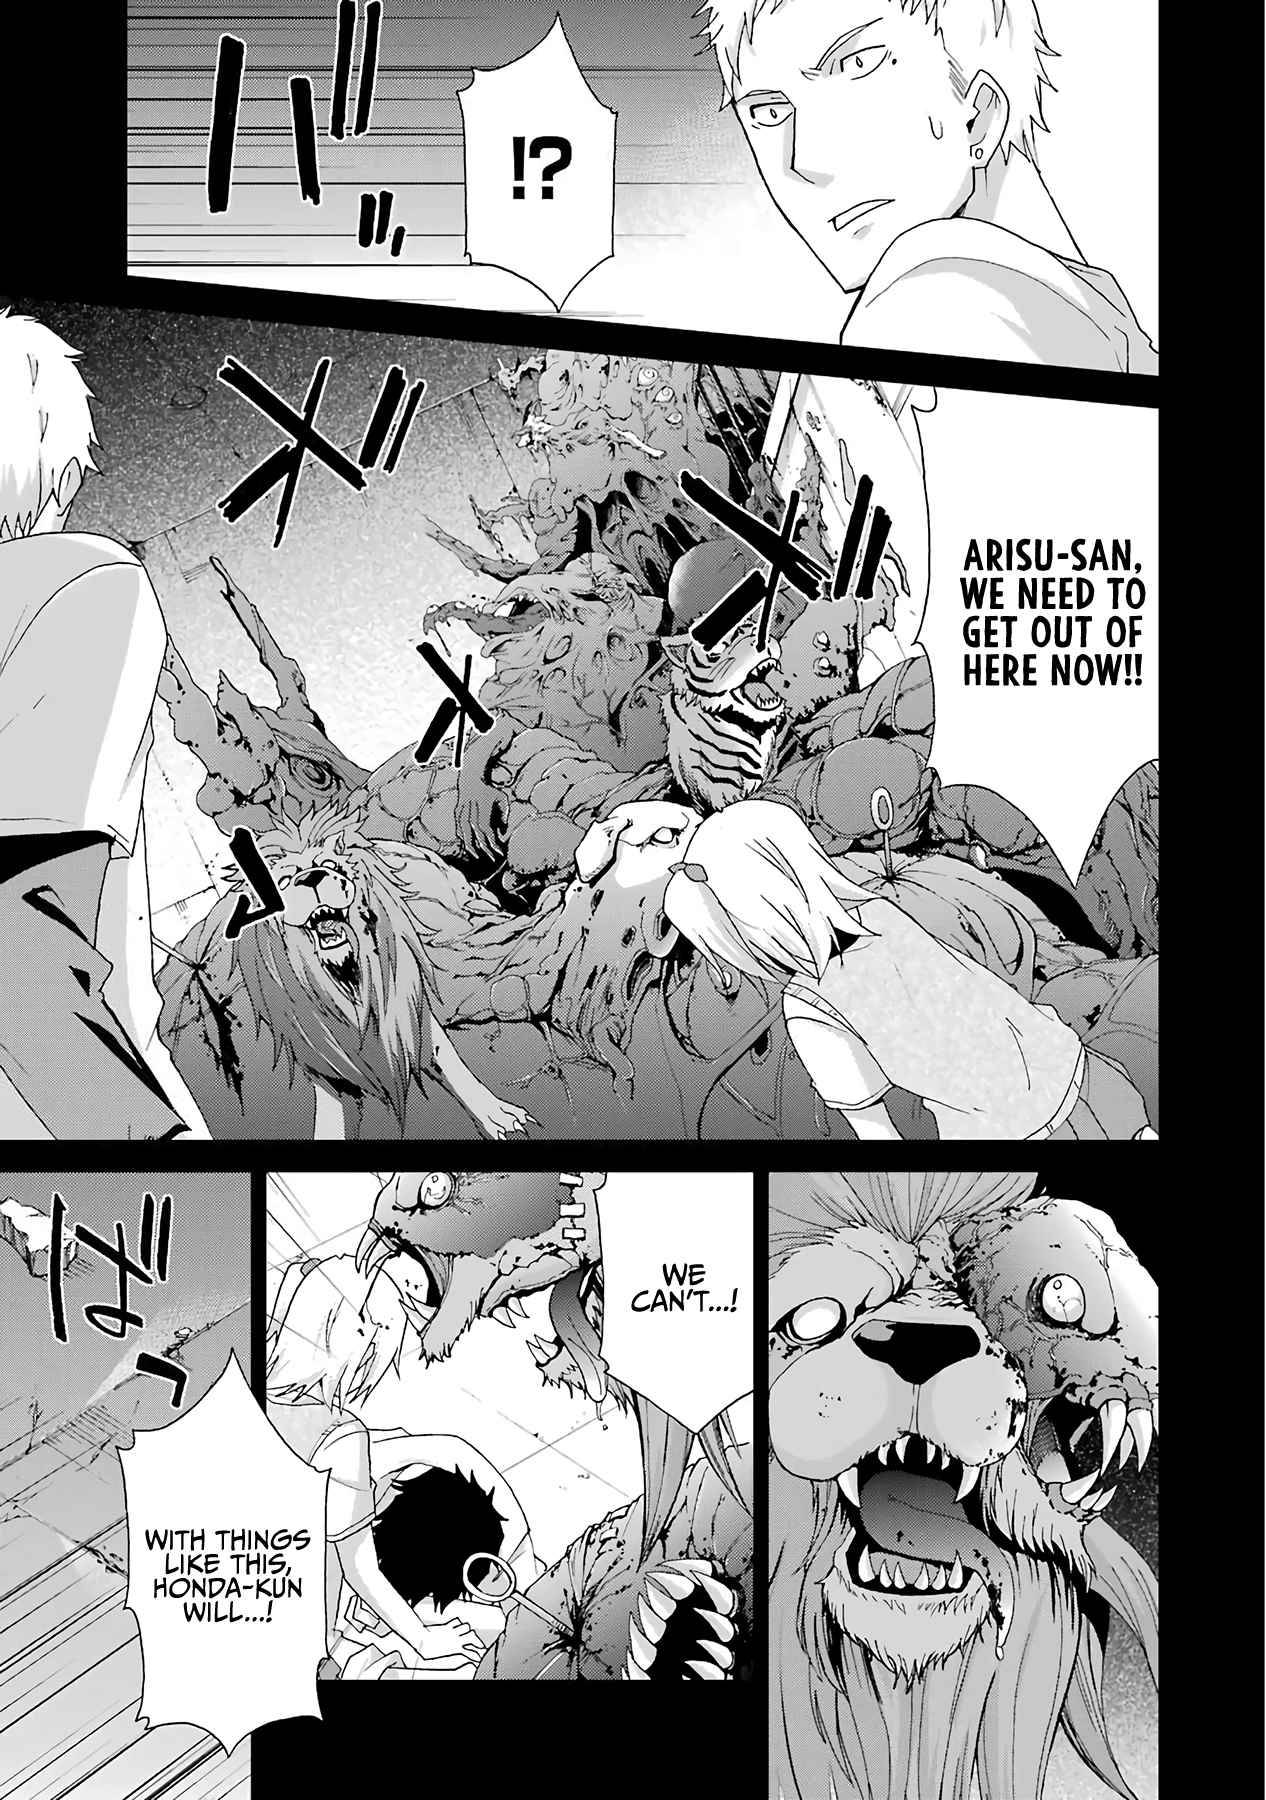 Are You Alive Honda-Kun? - chapter 35 - #1